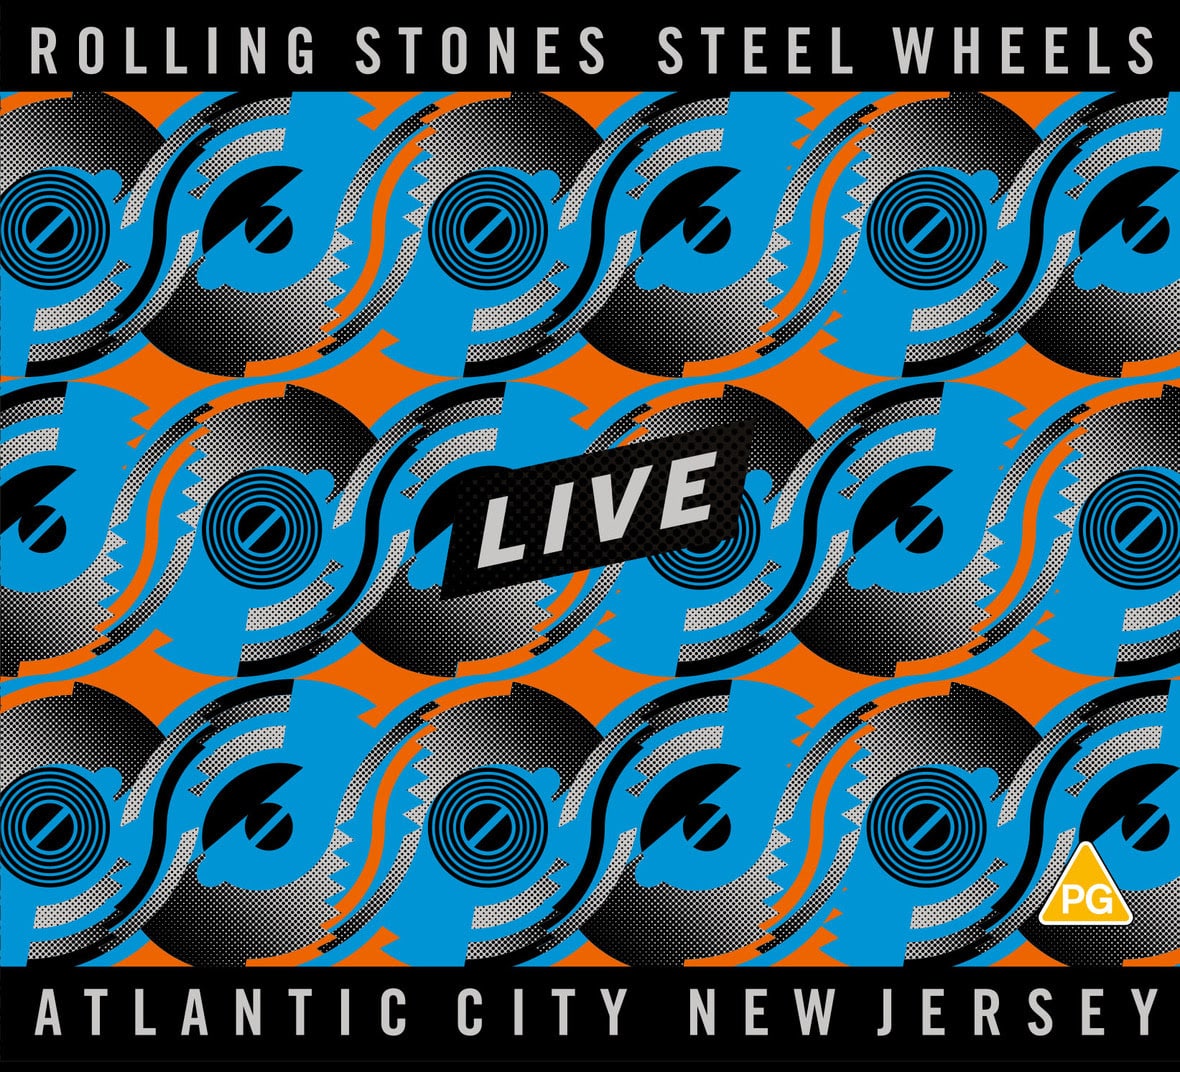 Rolling Stones to Release Concert Film, “Steel Wheels Live,” on Multiple Formats